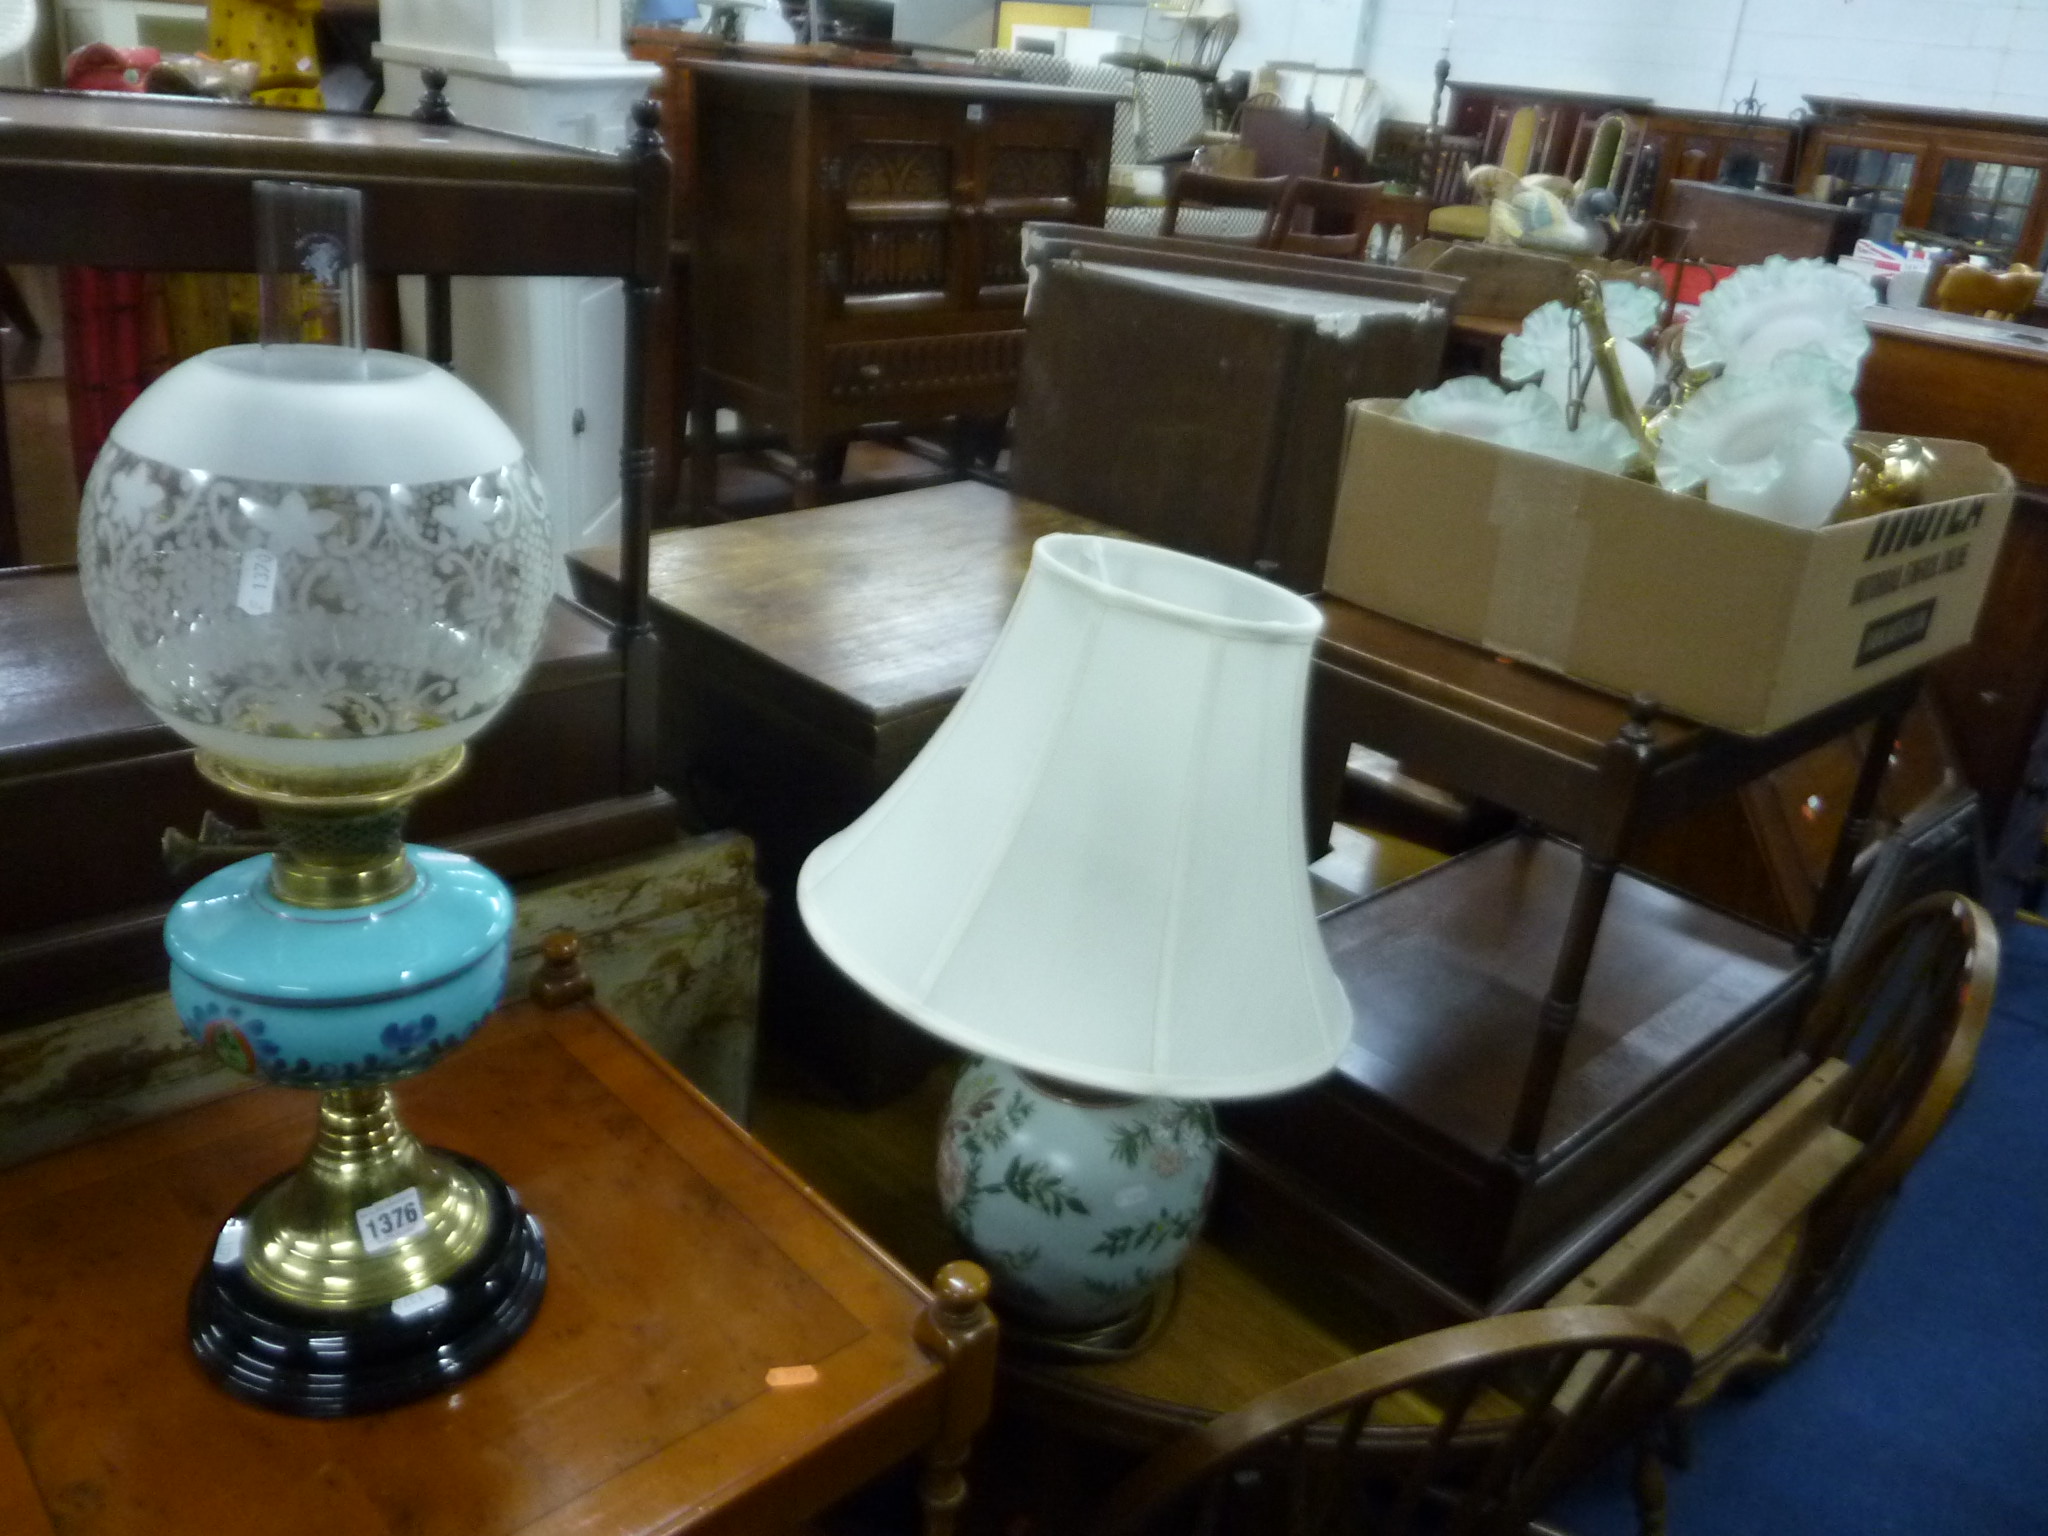 A VICTORIAN OIL LAMP, with funnel and shade, table lamp with shade and a box of various light